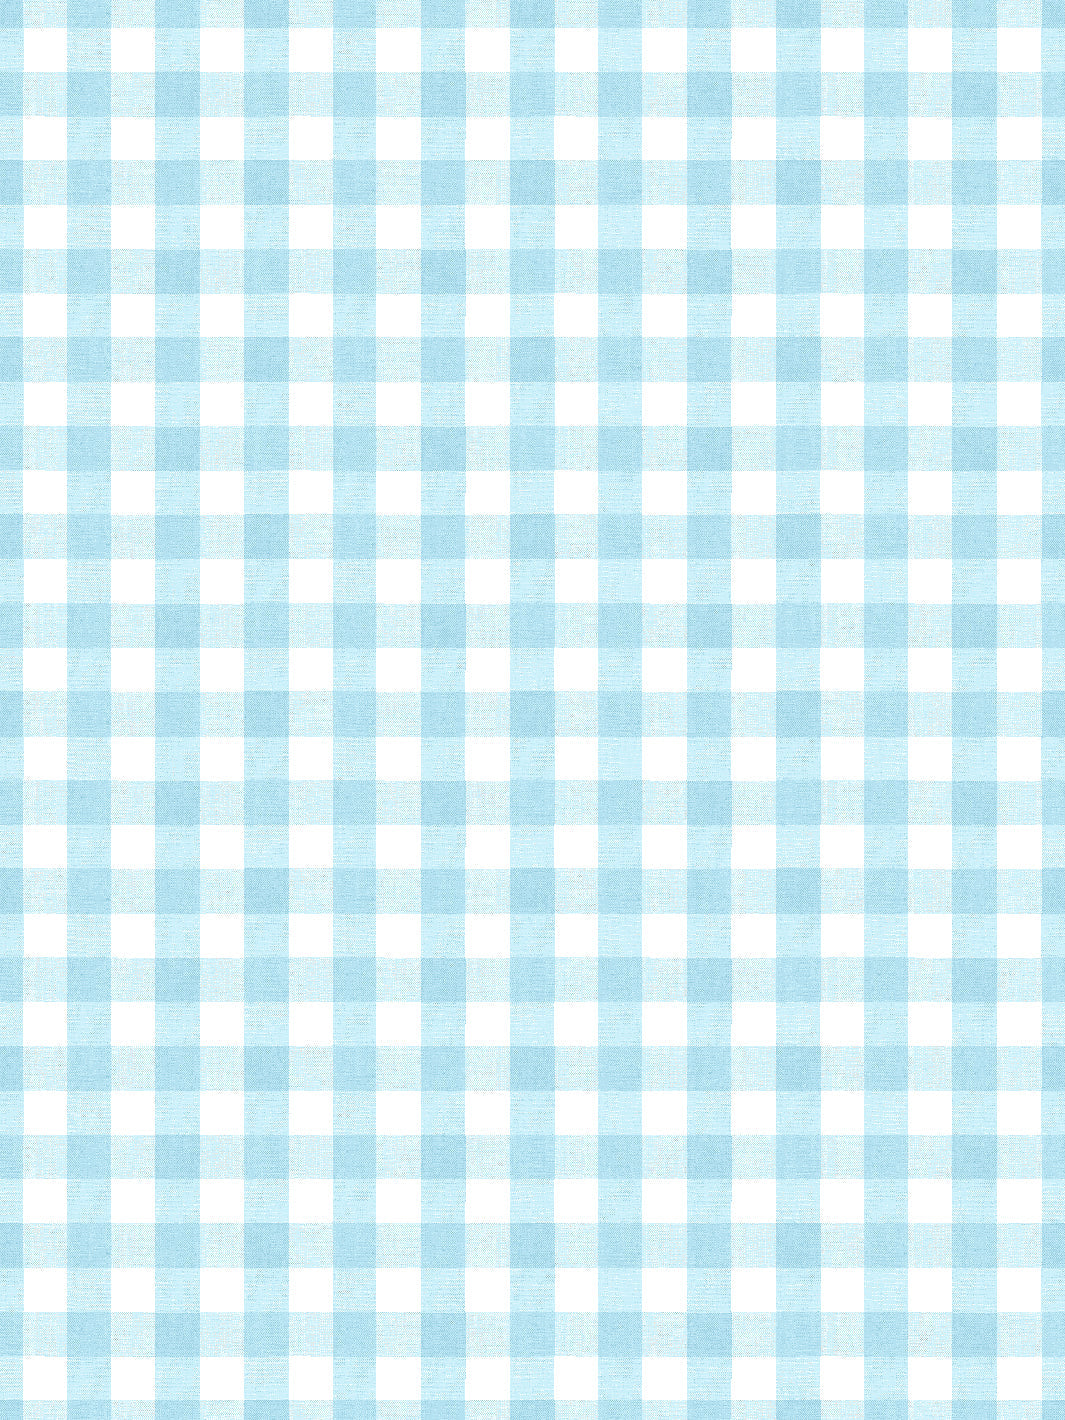 'Pixie Gingham' Wallpaper by Sarah Jessica Parker - Sky